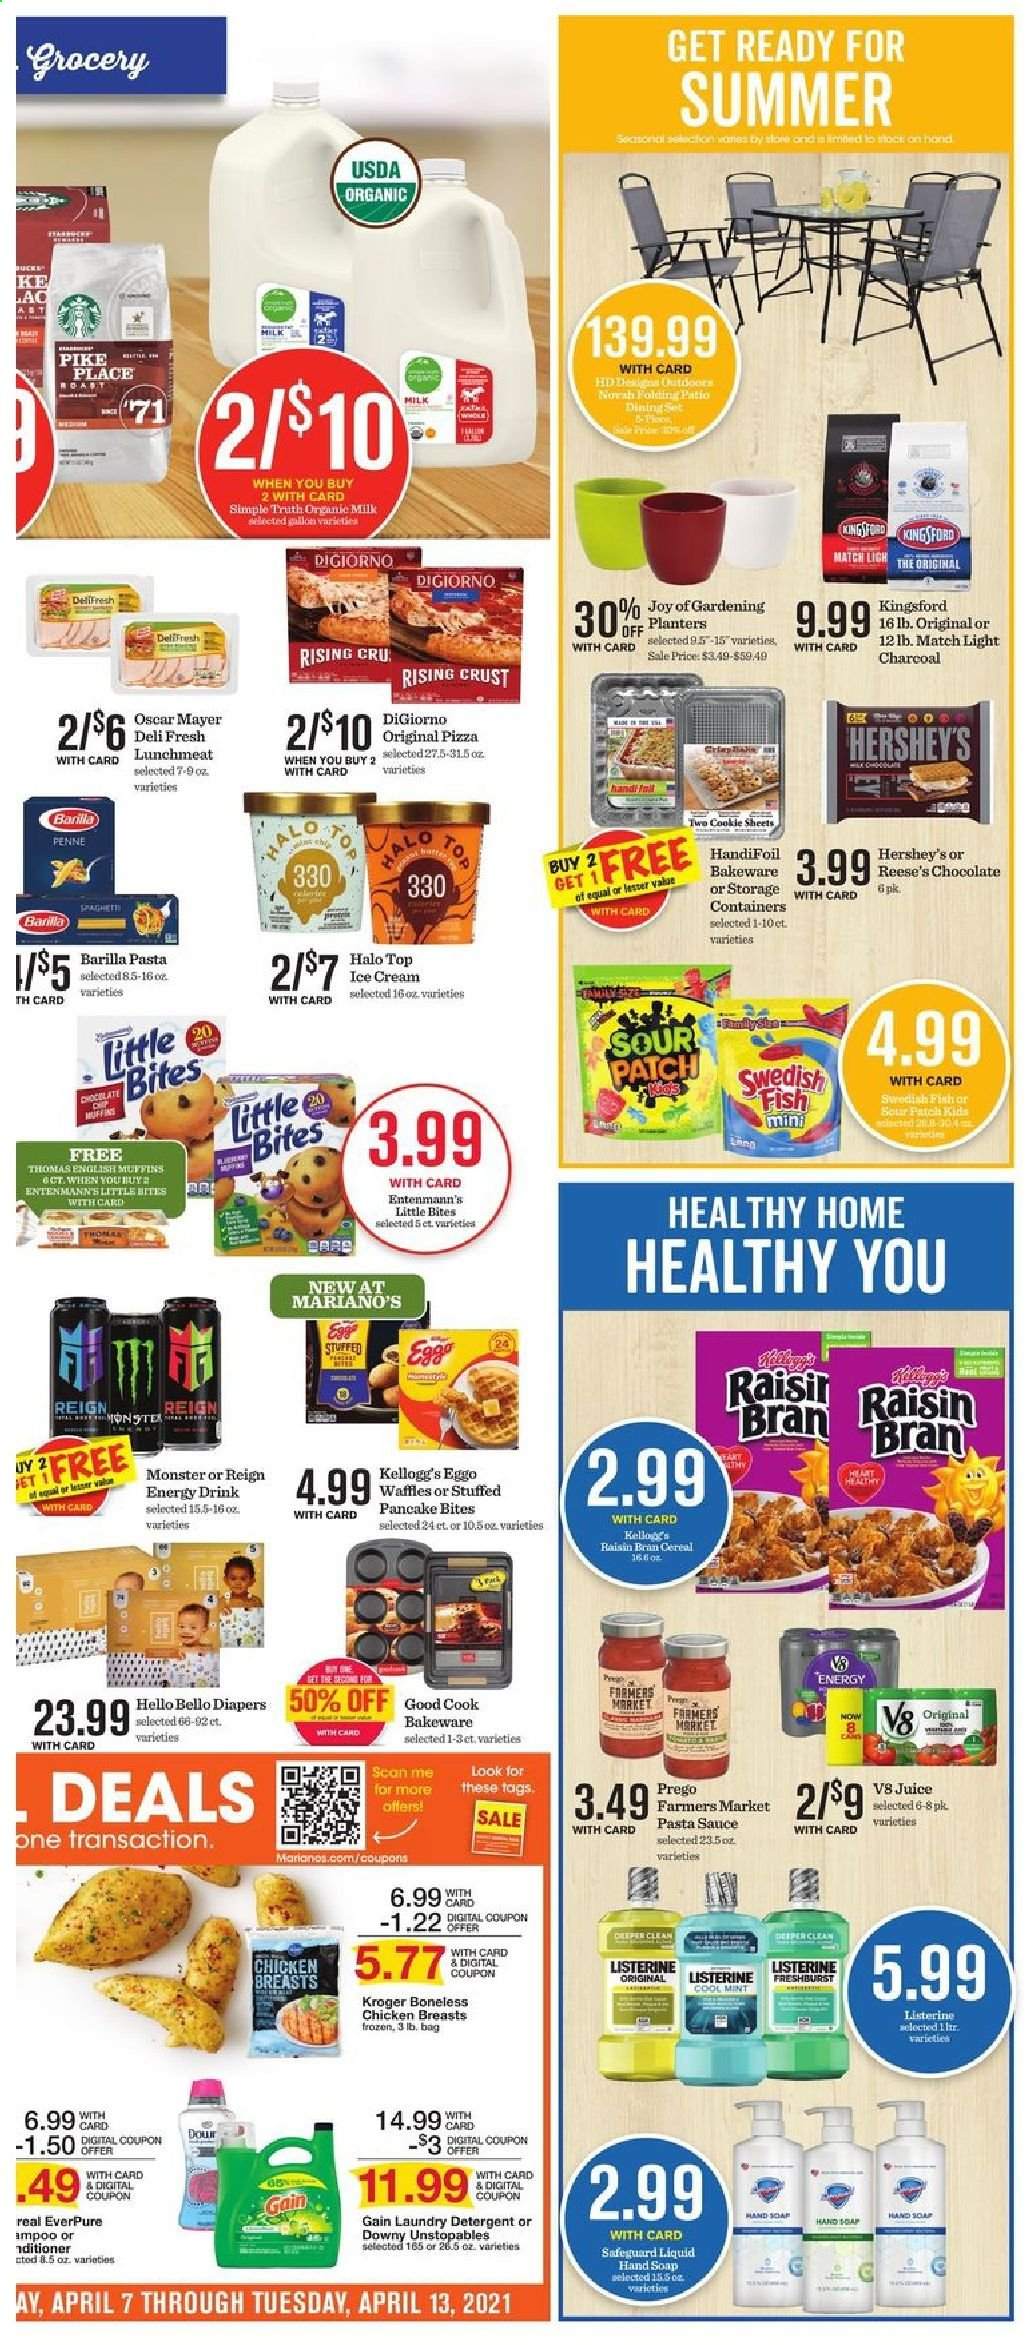 thumbnail - Mariano’s Flyer - 04/07/2021 - 04/13/2021 - Sales products - english muffins, waffles, Entenmann's, fish, pizza, pasta sauce, sauce, pancakes, Barilla, Oscar Mayer, lunch meat, milk, eggs, ice cream, Reese's, Hershey's, chocolate, Kellogg's, Little Bites, Sour Patch, cereals, Raisin Bran, penne, Planters, juice, energy drink, Monster, chicken breasts, detergent, Gain, Unstopables, laundry detergent, Joy, bakeware. Page 5.